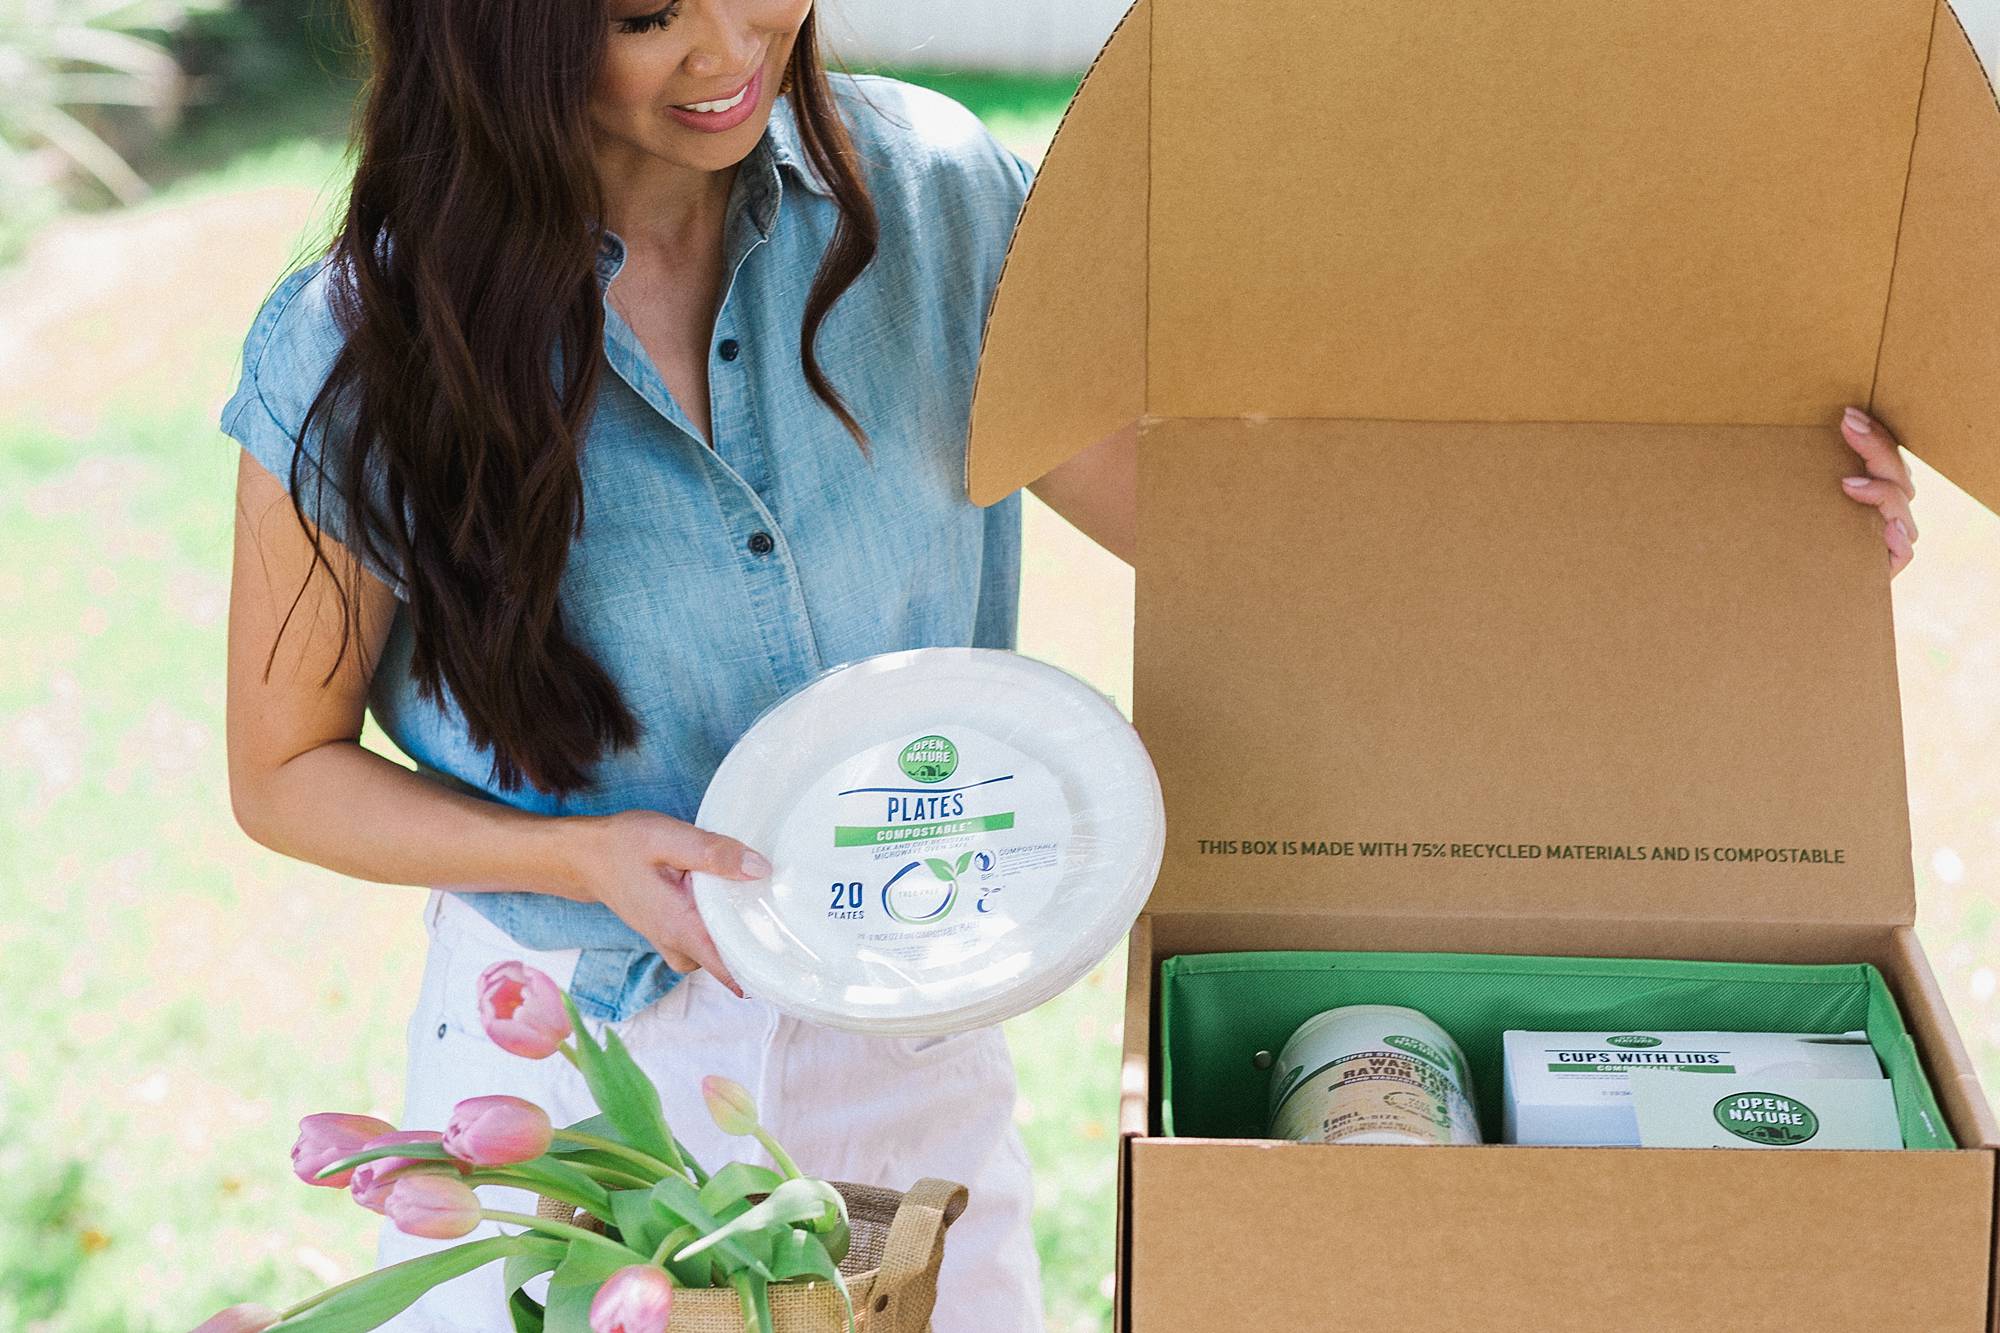 compostable items from Safeway great for entertaining